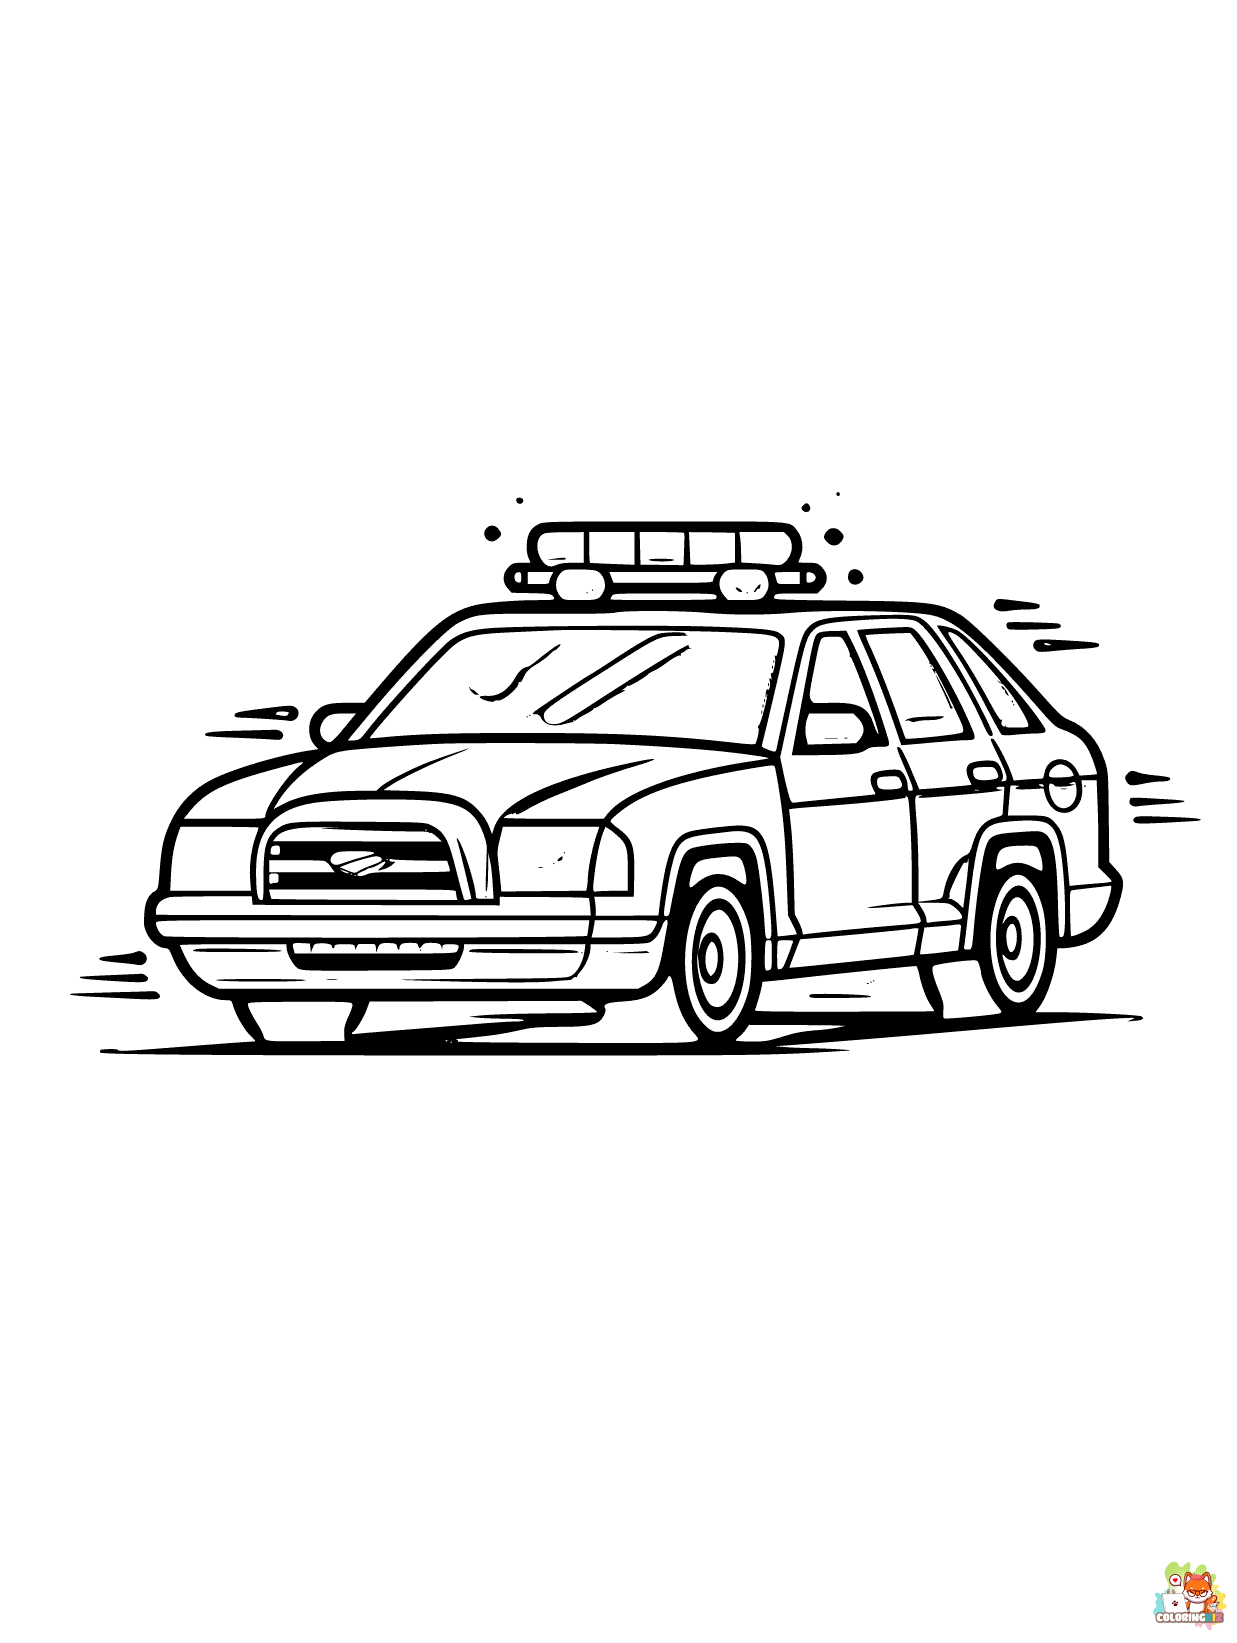 Car coloring pages 4